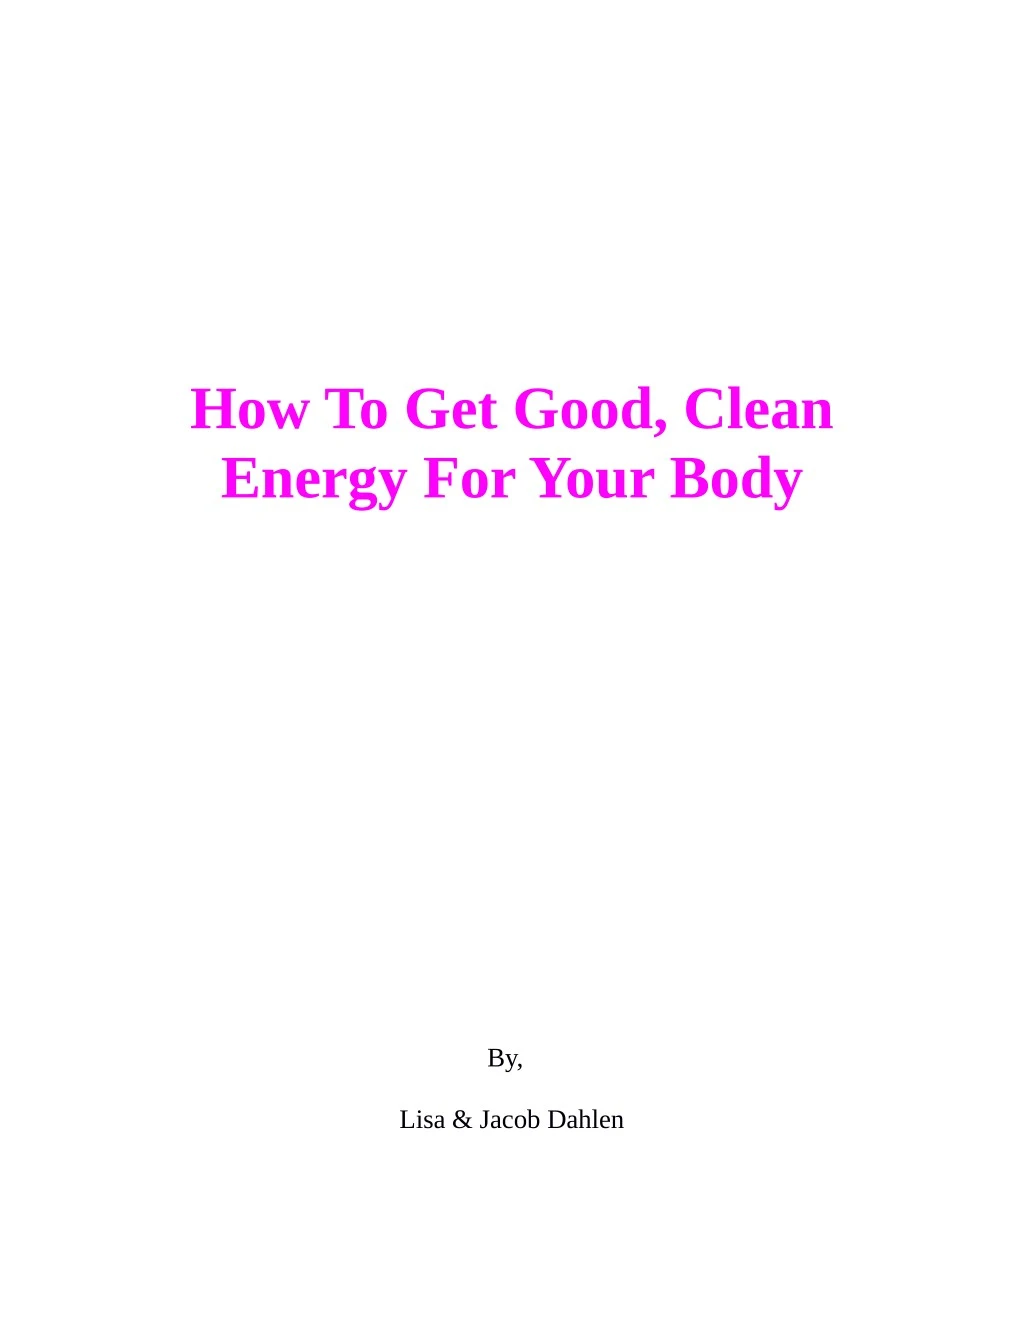 how to get good clean energy for your body